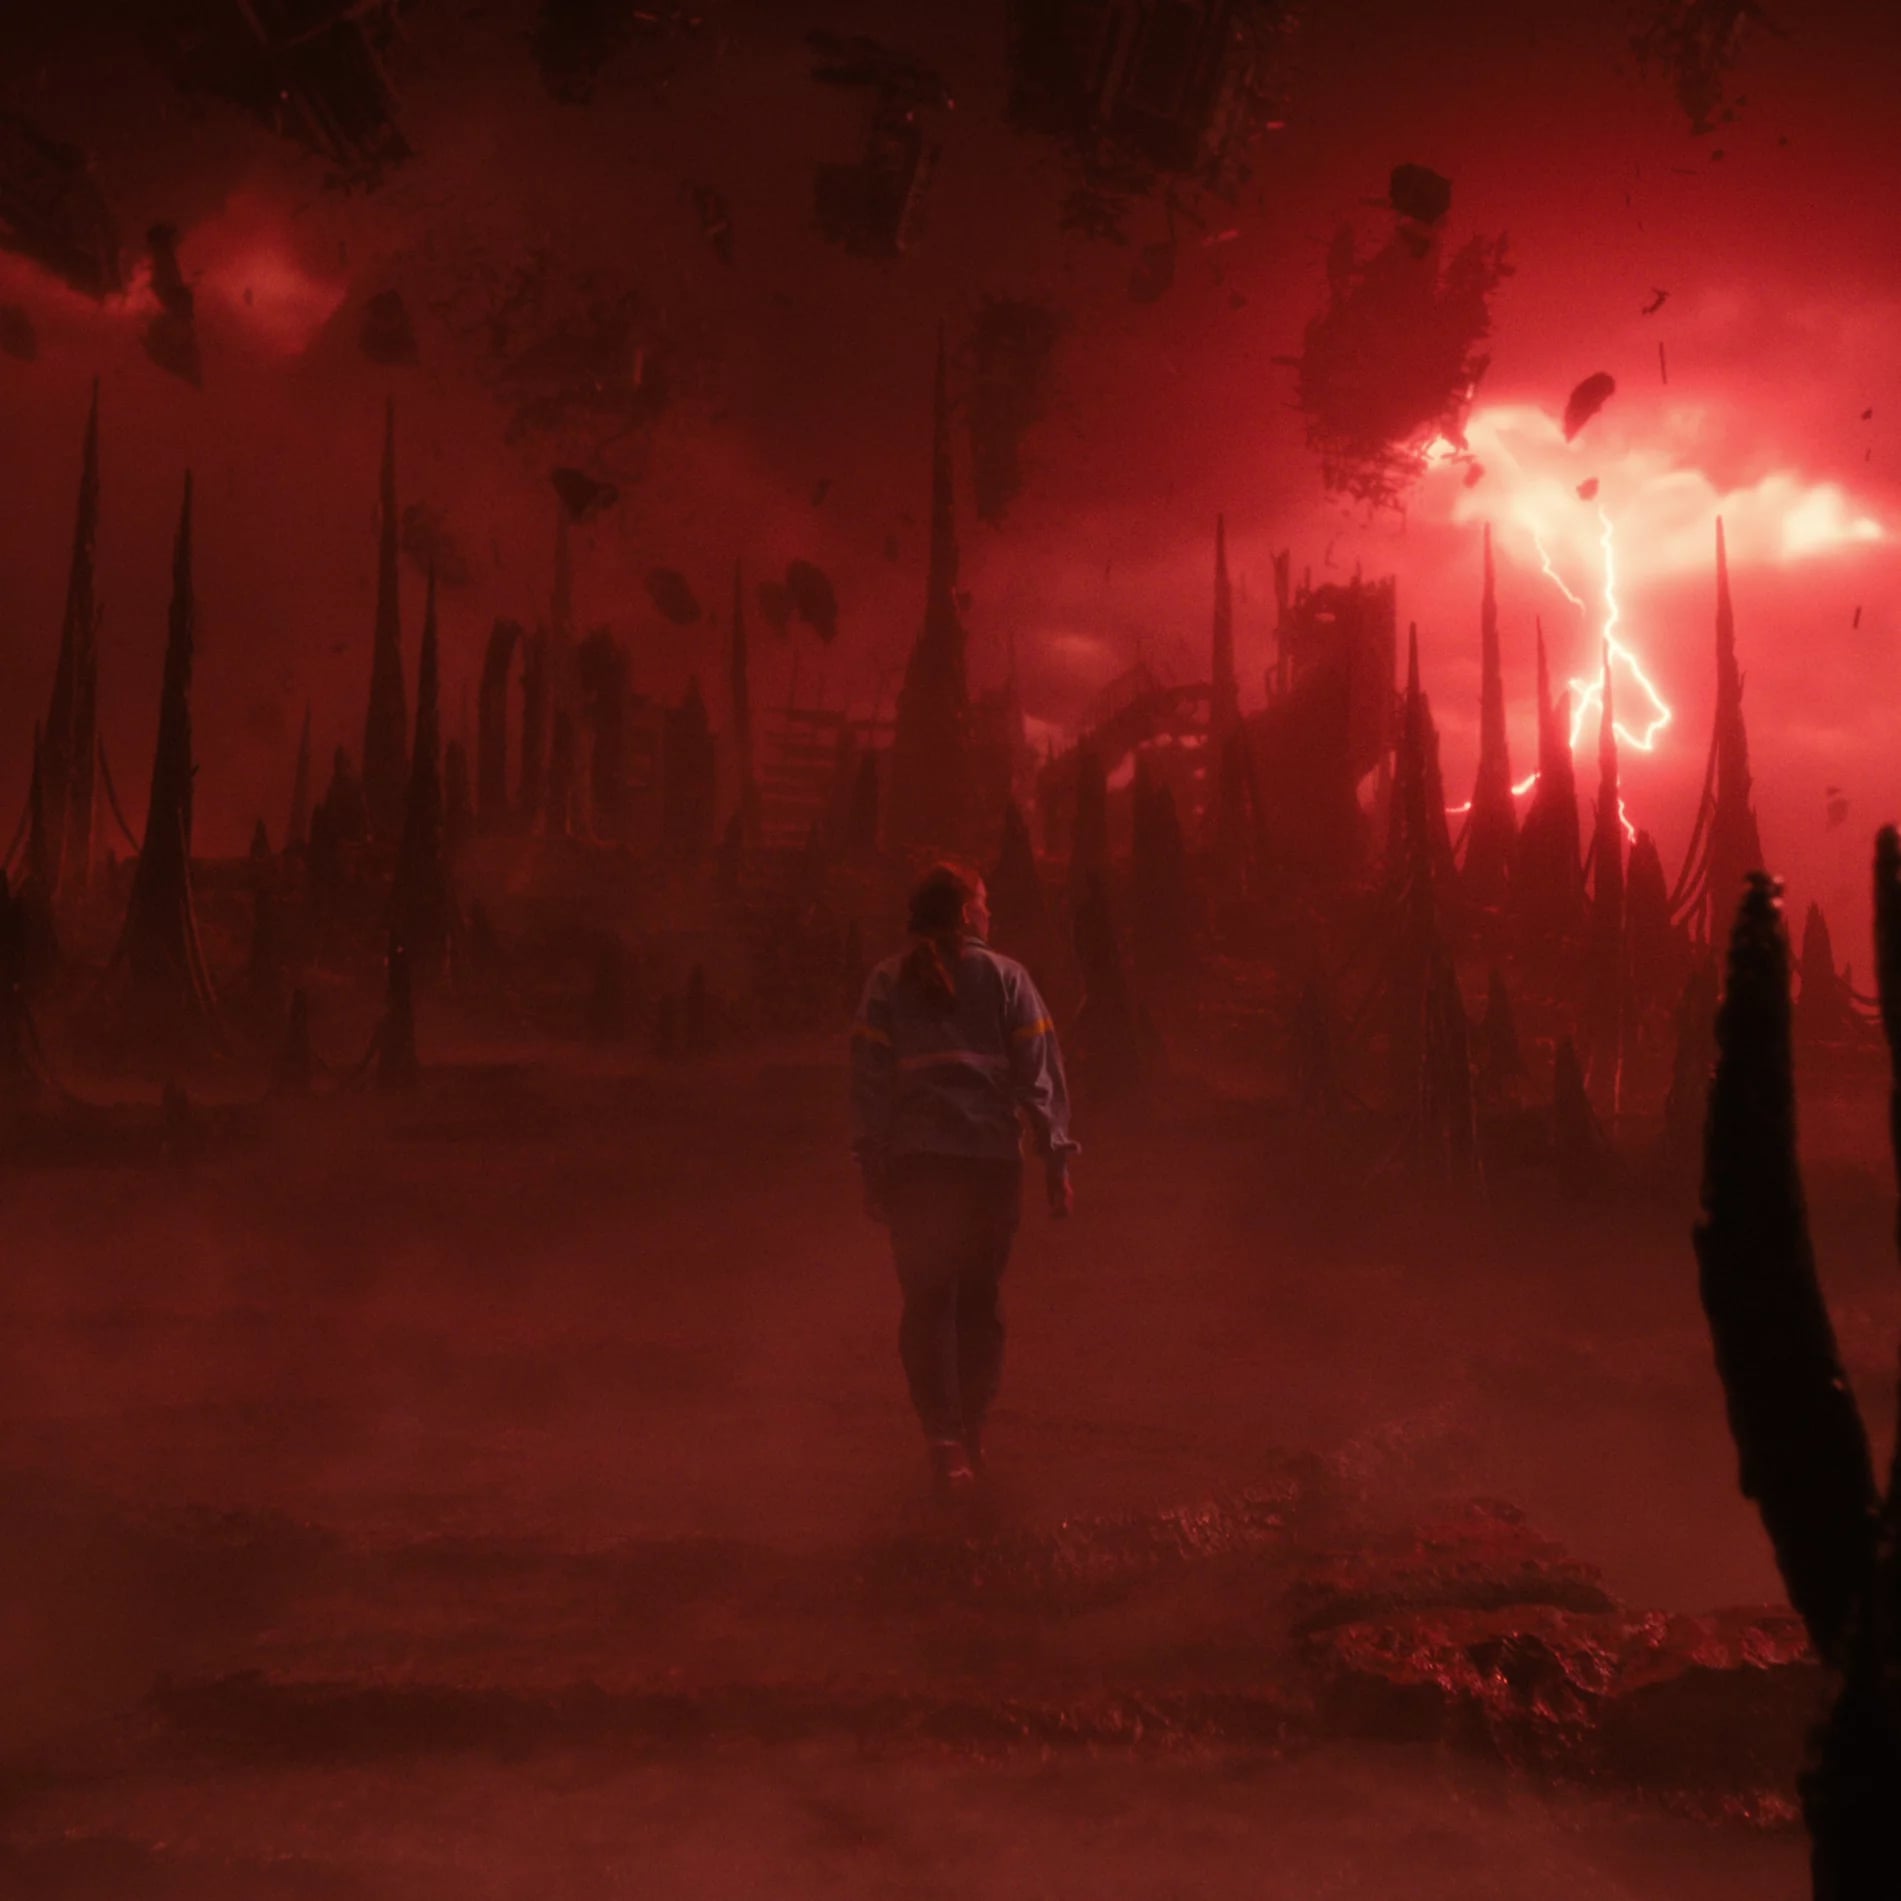 Stranger Things 3 first trailer unleashes monsters